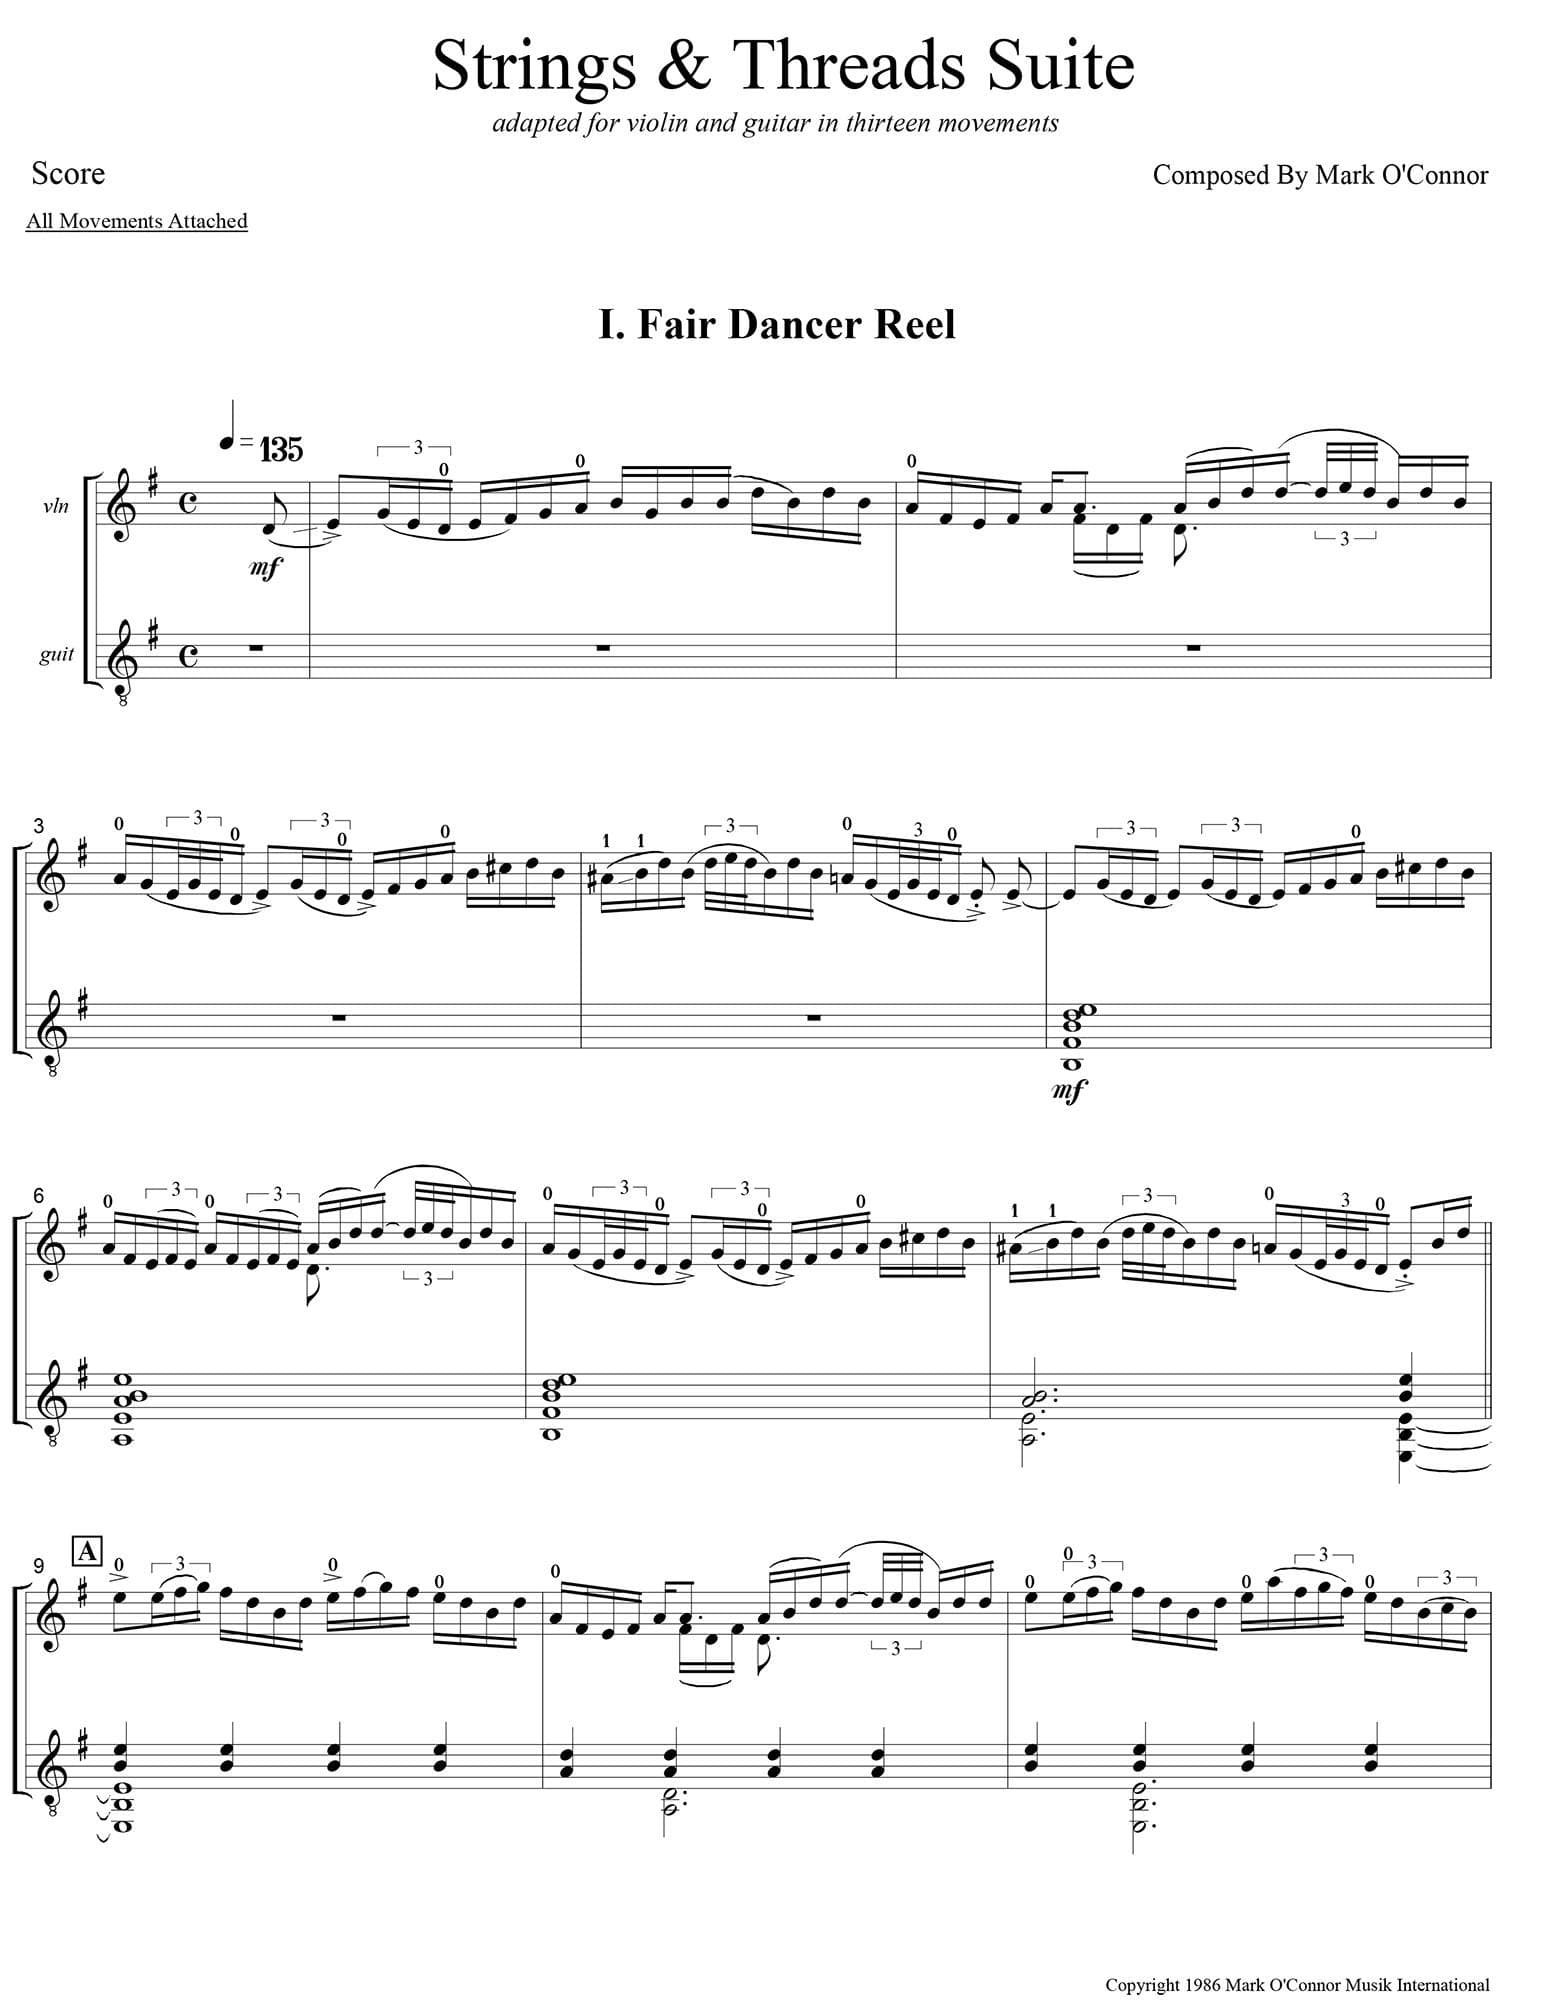 O'Connor, Mark - Strings & Threads Suite for Violin and Guitar - Score - Digital Download